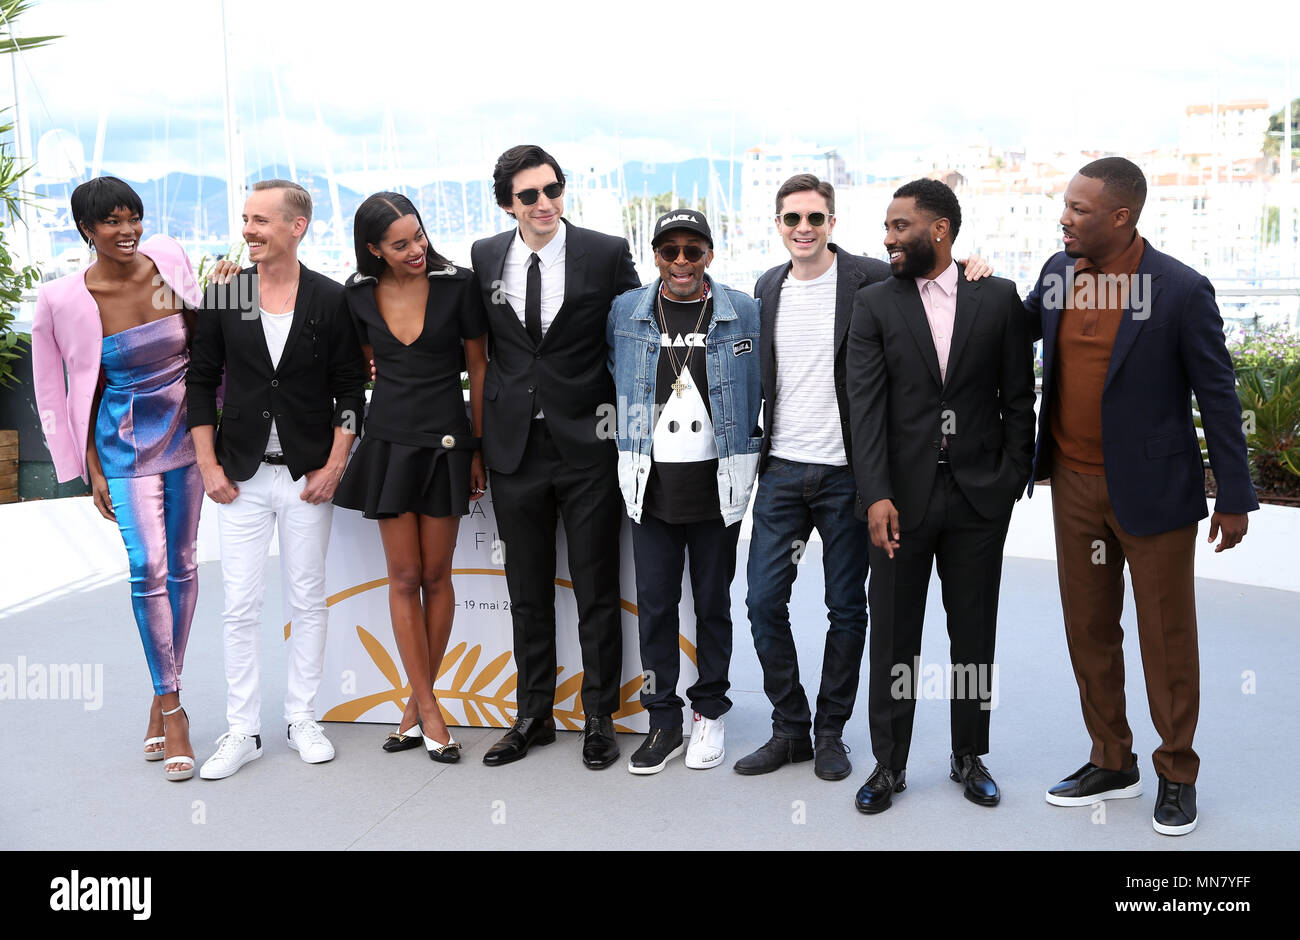 Cannes. 15th May, 2018. Director Spike Lee (4th R) and the crew of the film 'BlacKkKlansman' pose during a photocall of the 71st Cannes International Film Festival in Cannes, France on May 15, 2018. The 71st Cannes International Film Festival is held from May 8 to May 19. Credit: Luo Huanhuan/Xinhua/Alamy Live News Stock Photo